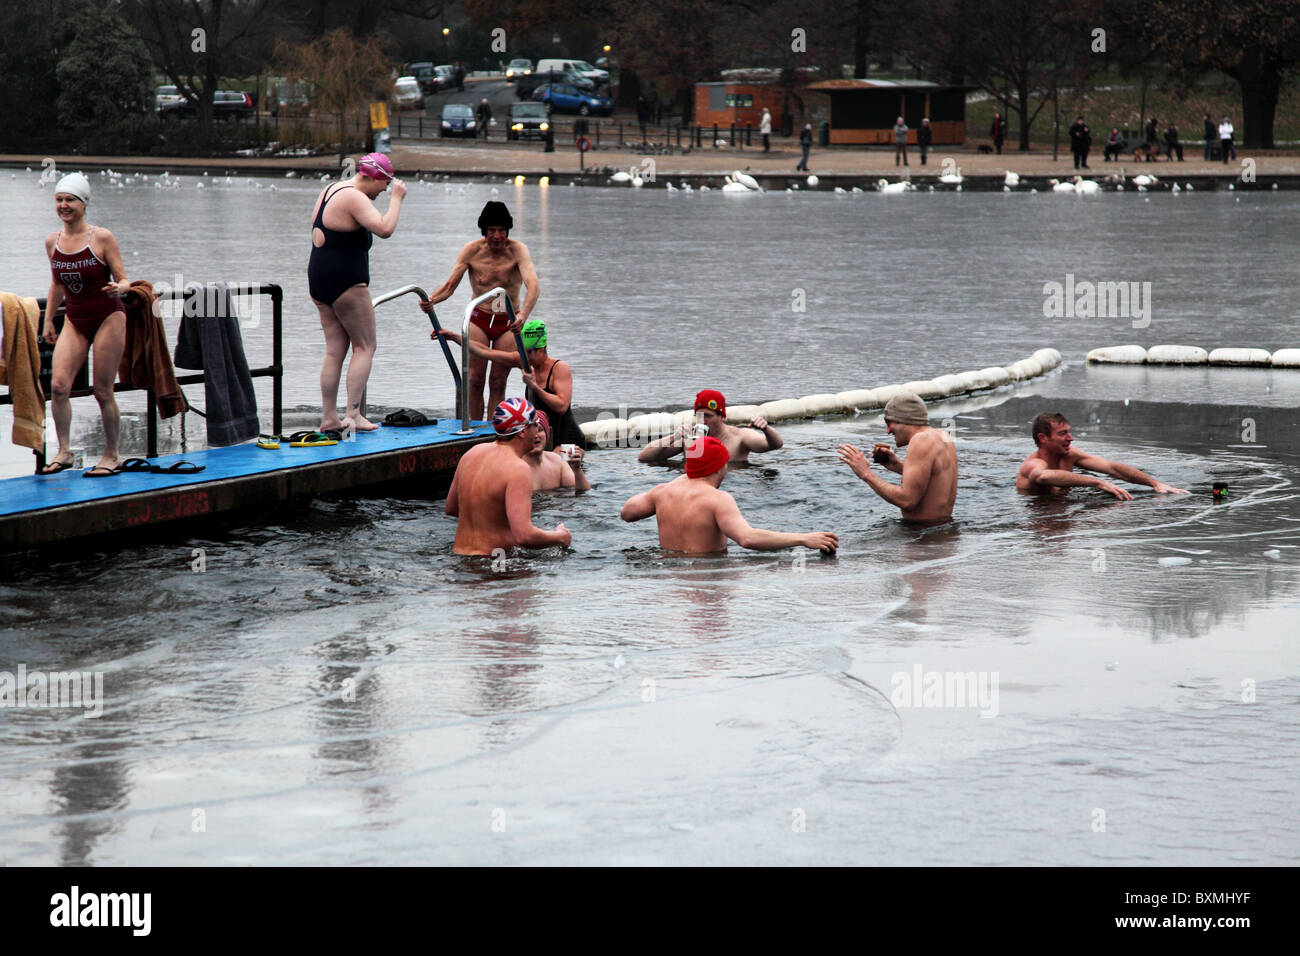 On Christmas Day 2010 at the Serpentine Swimming Club in Hyde Park, London. Stock Photo